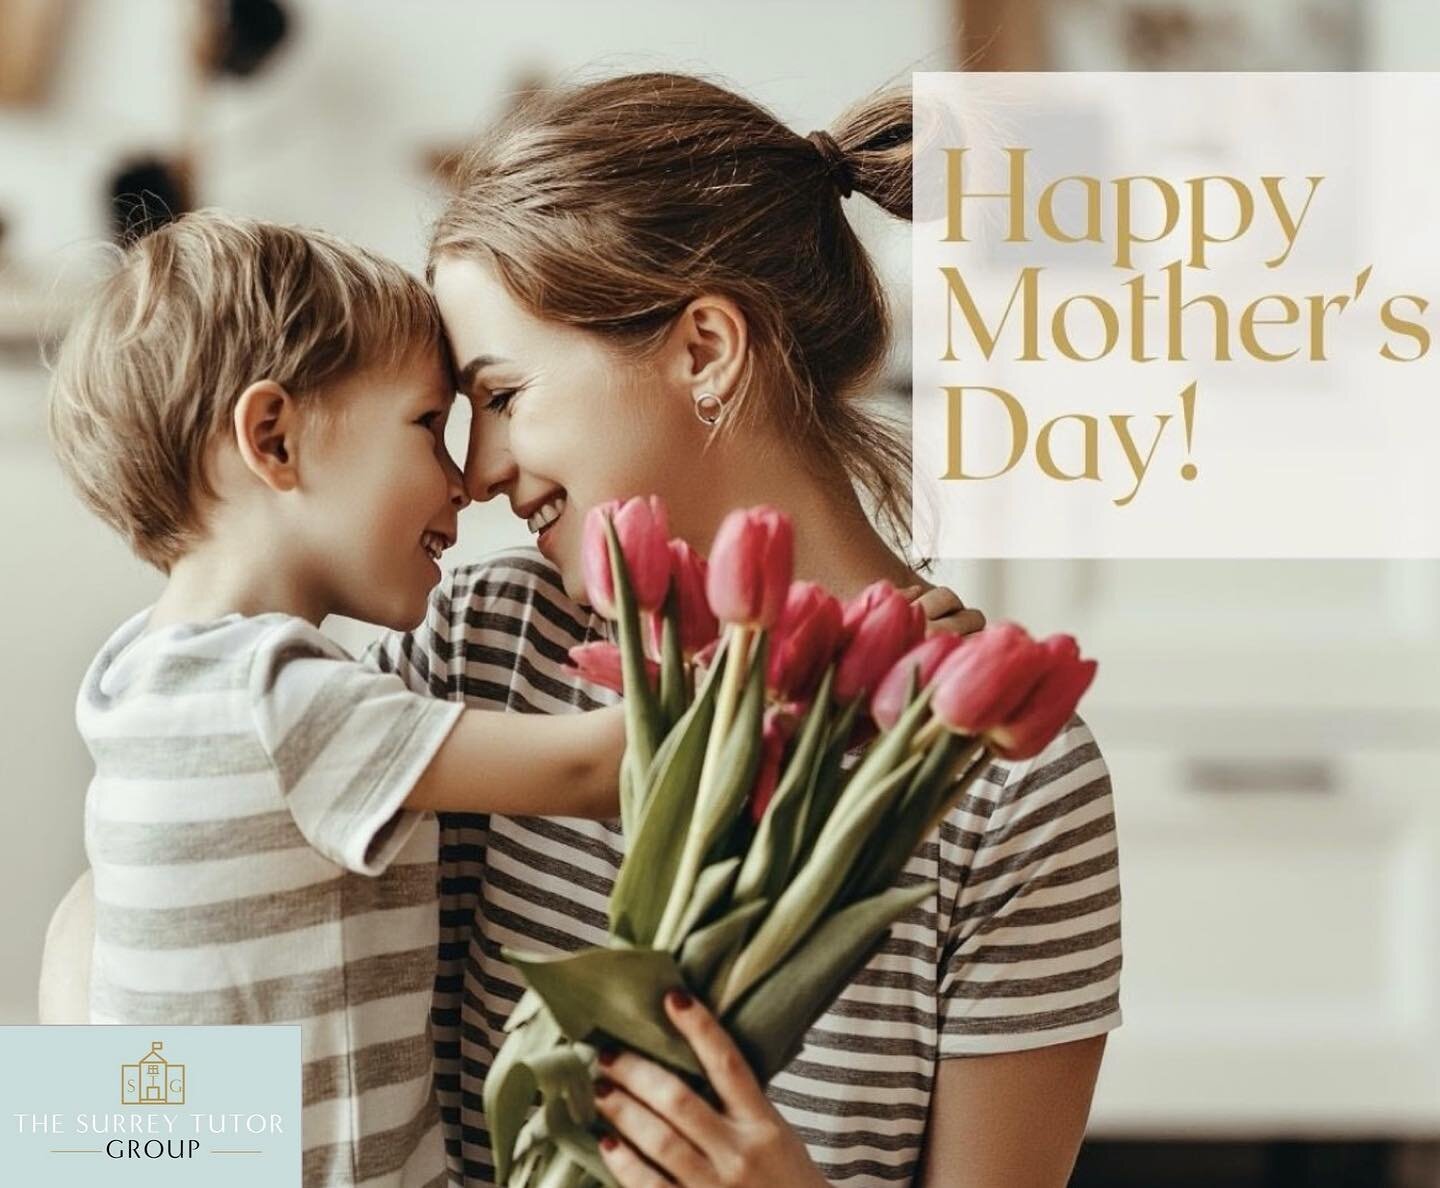 Sending lots of love to all mothers and motherly figures this Mothering Sunday. 💐

#thesurreytutorgroup #mothersday #motheringsunday #surreymums